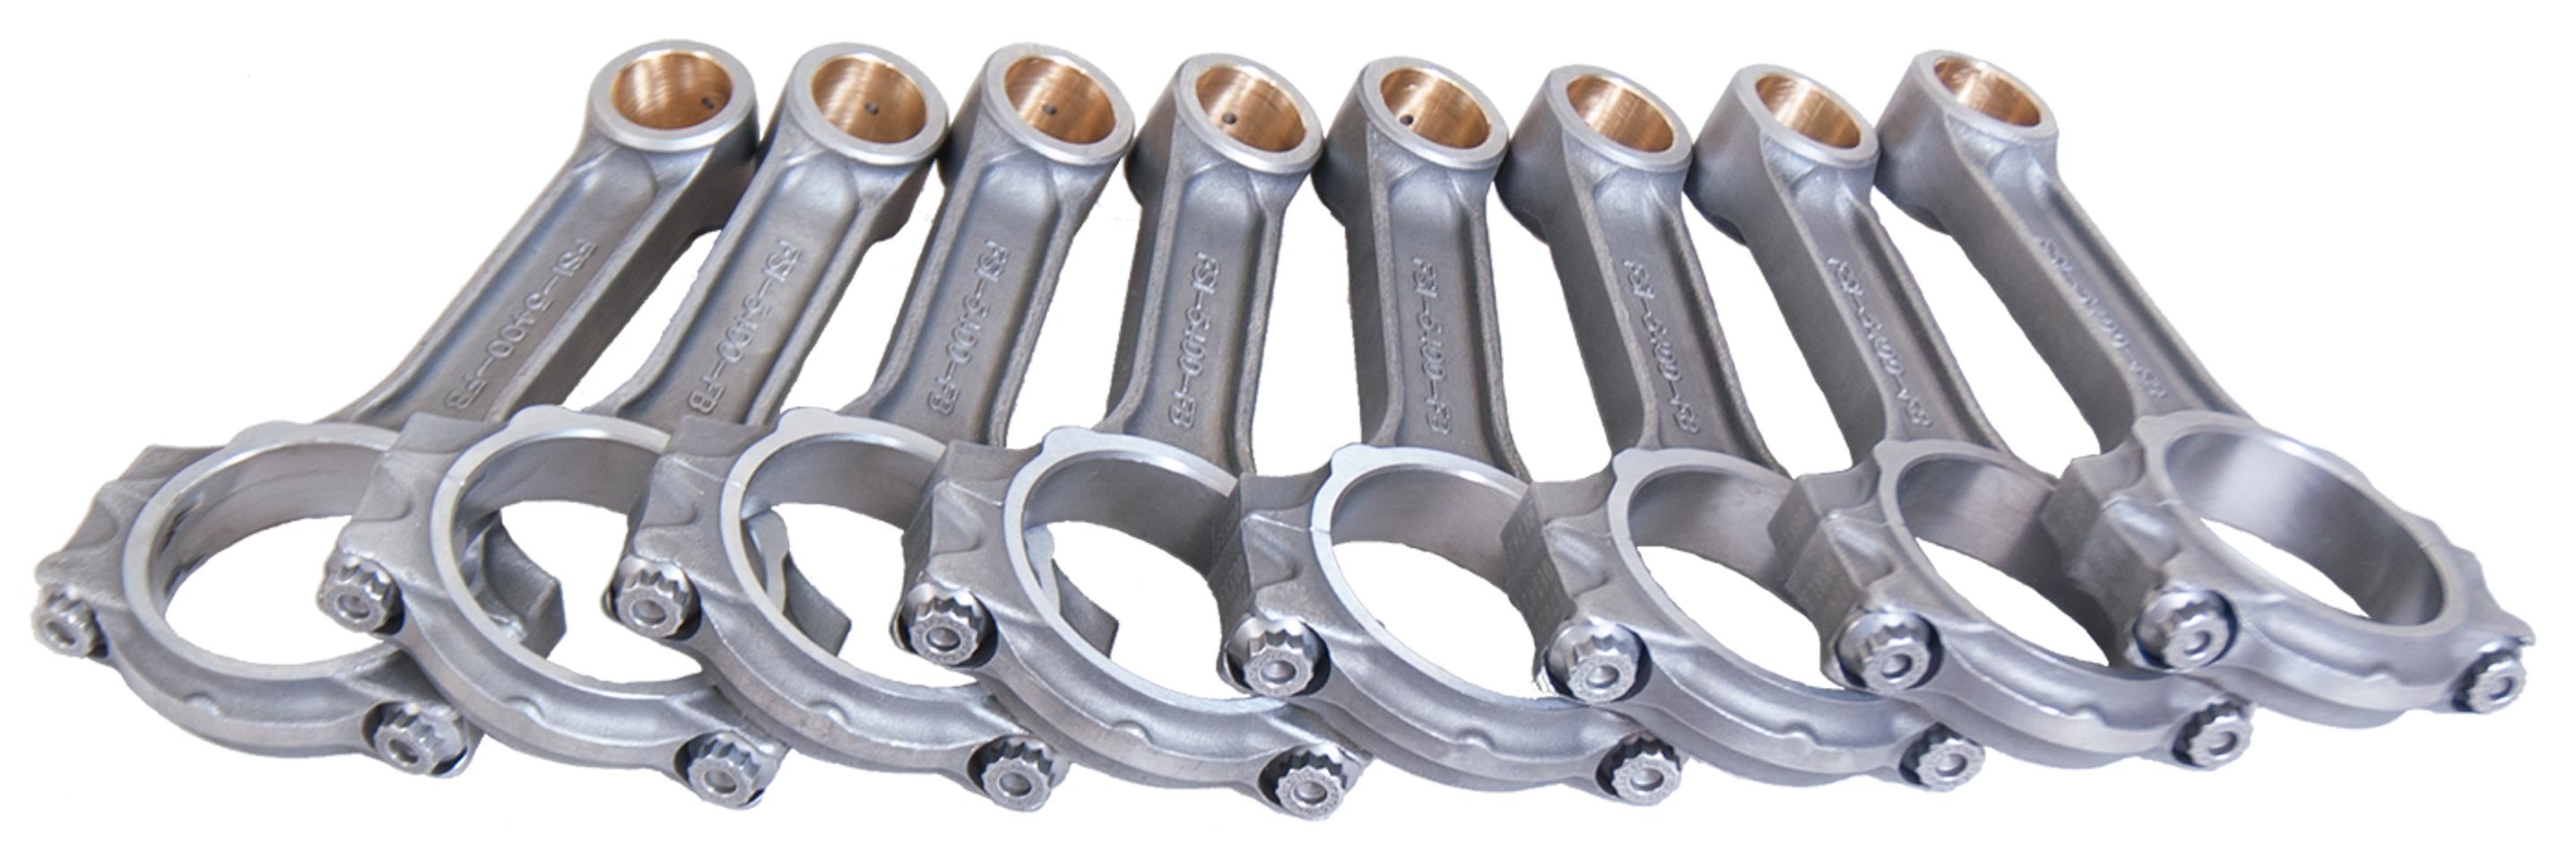 Eagle FSI5400FB - Connecting Rod, I-Beam, 5.400 in Long, Press Fit, 7/16 in Cap Screw, Forged Steel, Small Block Ford, Set of 8